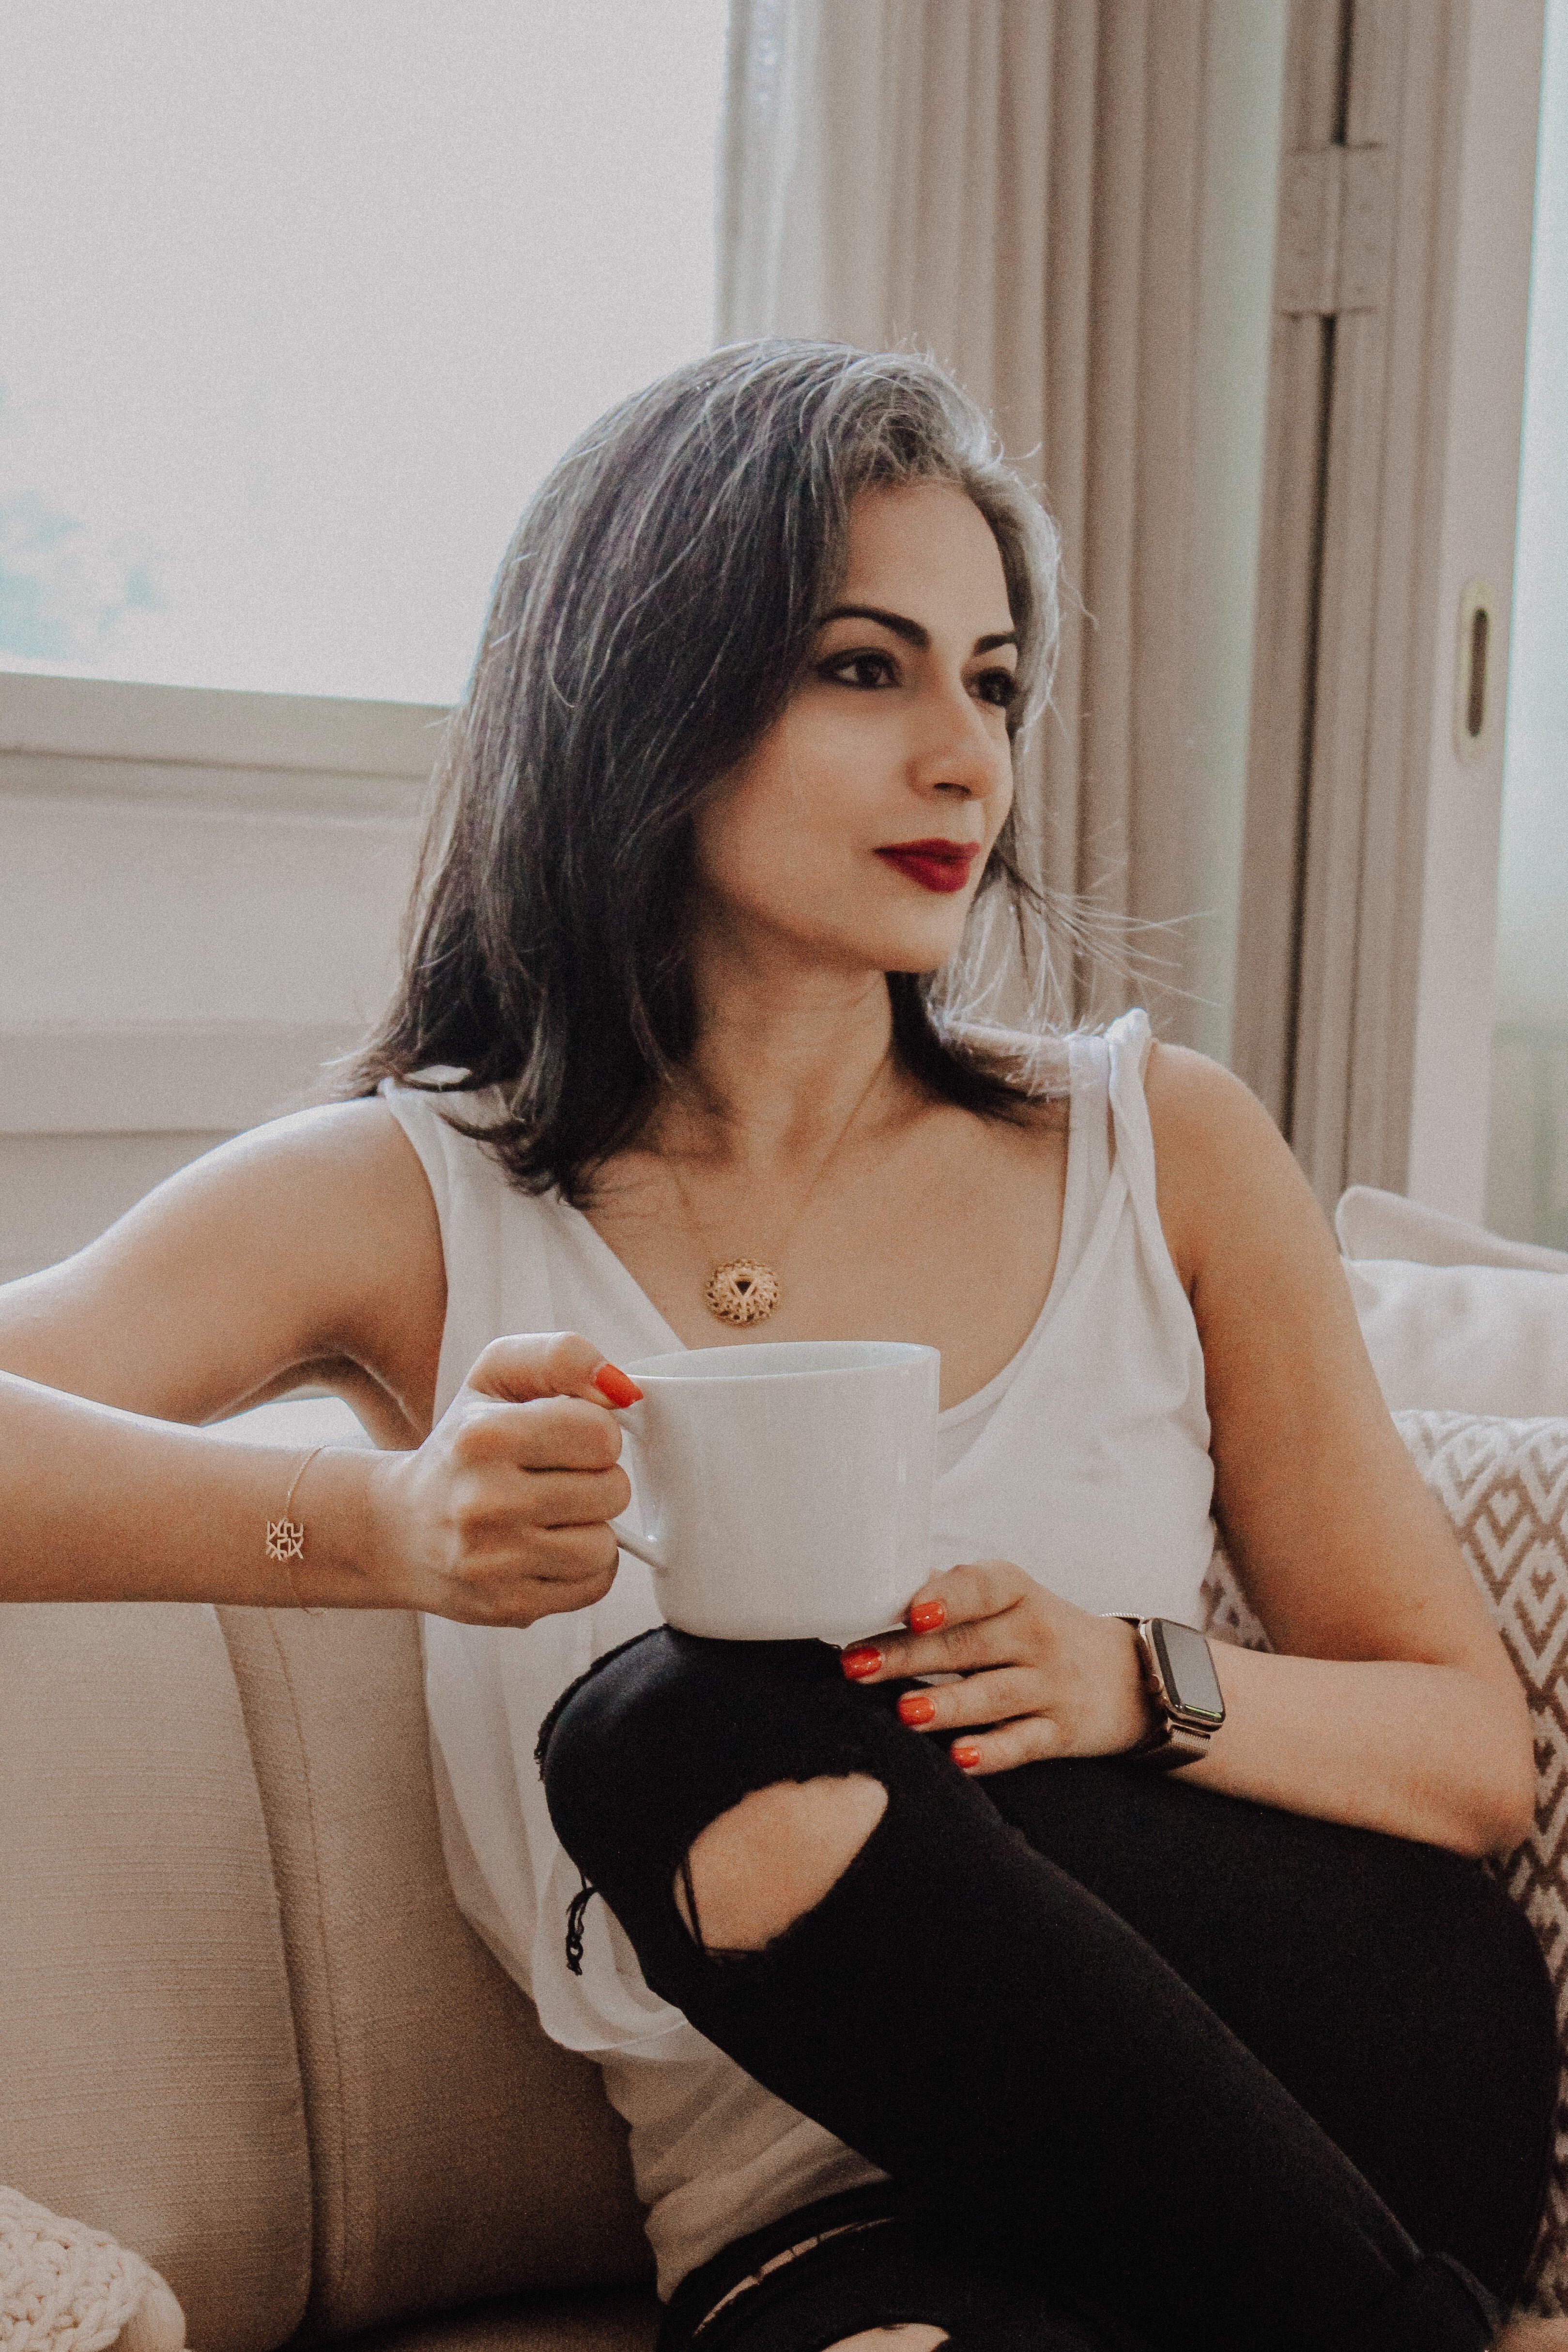 Mayuri Punjabi, founder of MyEurekaLife, offers her clients tailored weight-loss programmes that involve a permanent change in lifestyle. Photo: Marjhan Kausar